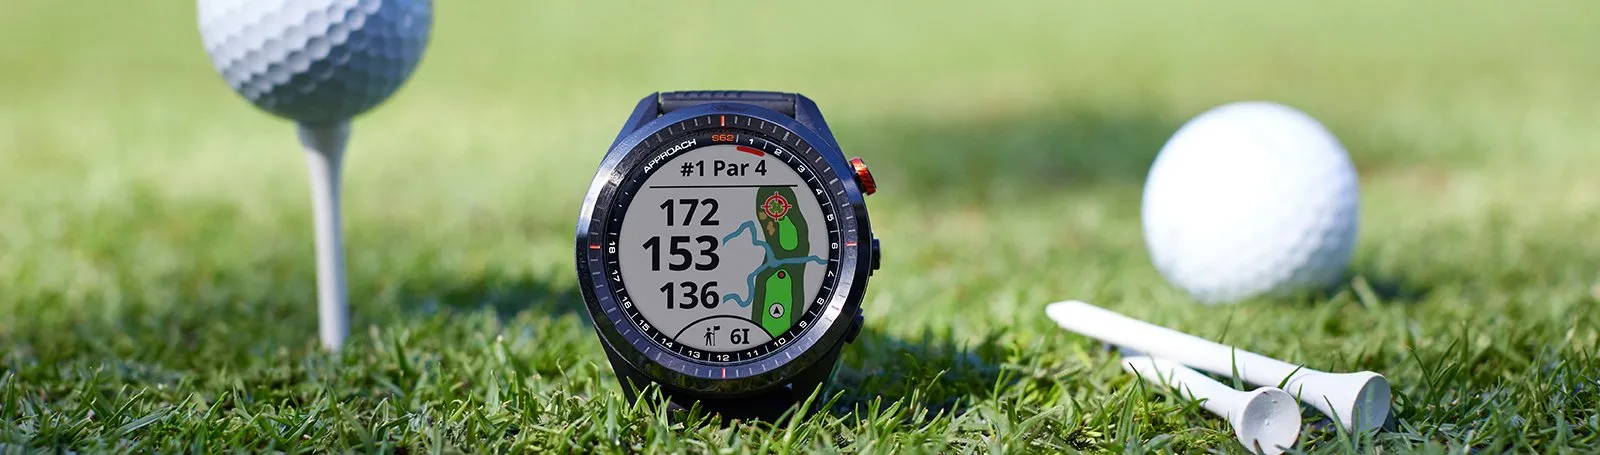 A Garmin Approach S62 on the grass of a golf course next to golf tees and golf balls